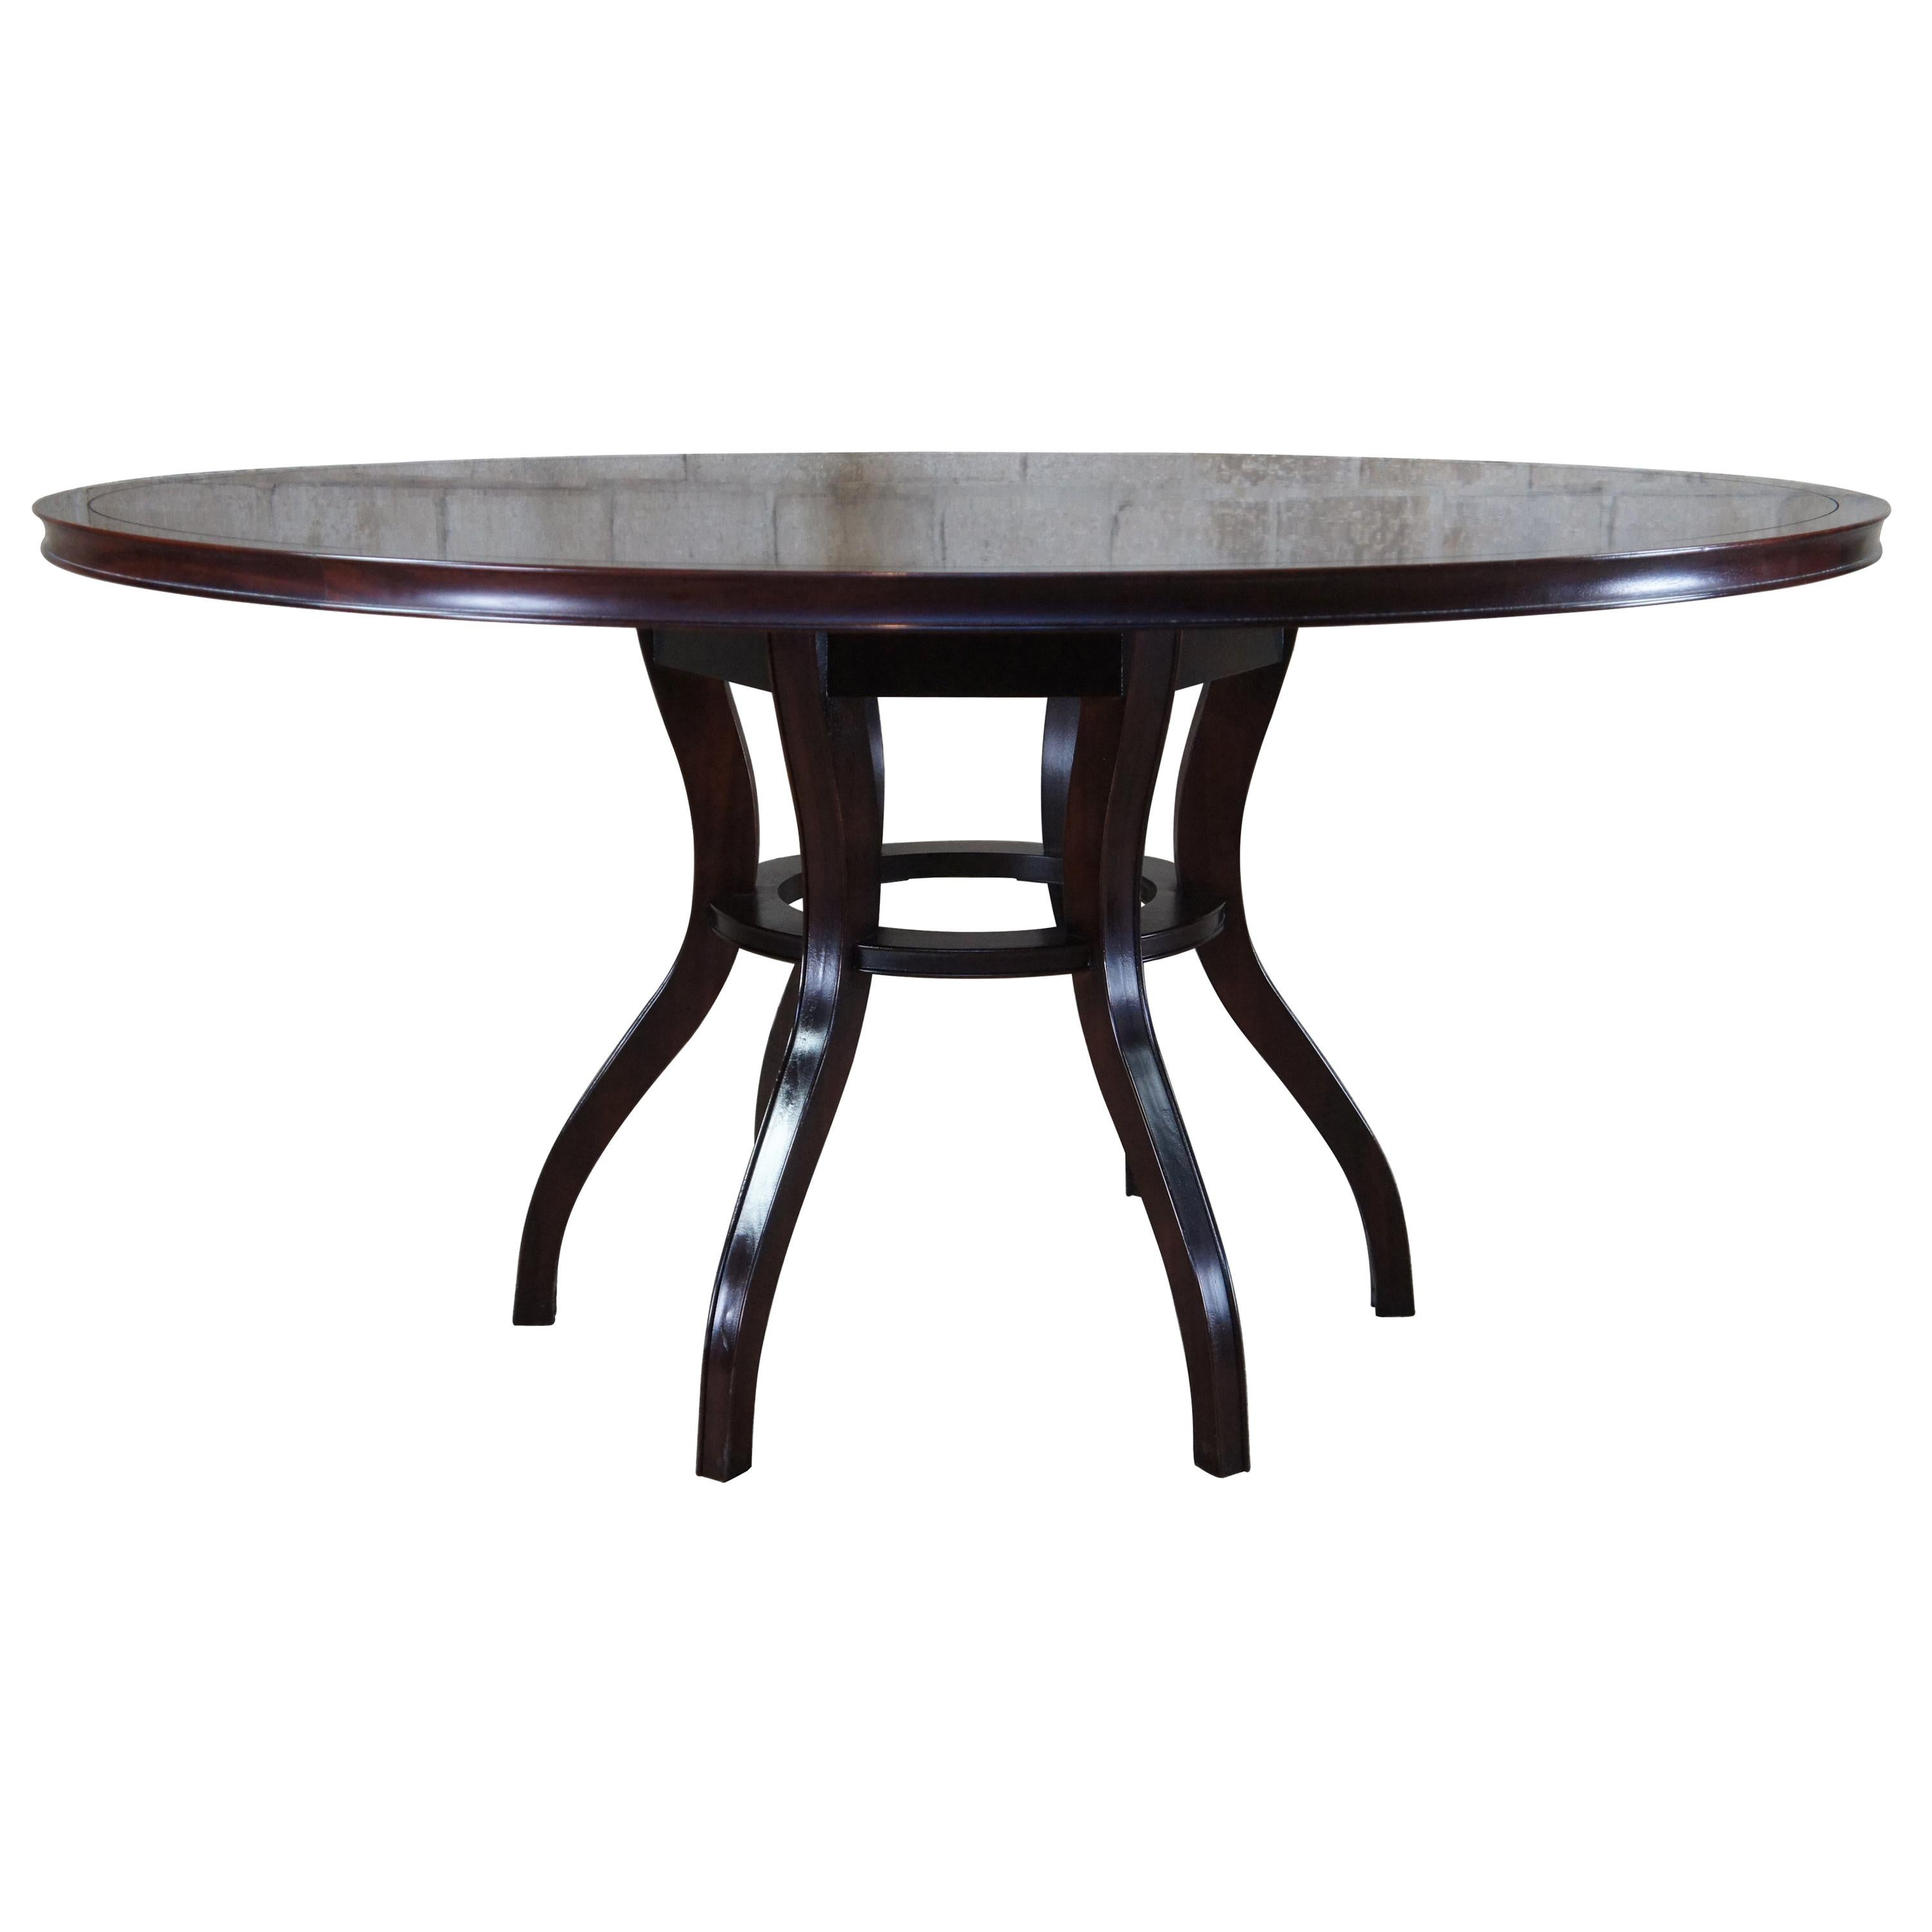 Barbara Barry Baker Furniture Neoclassical Round Pedestal Dining Table